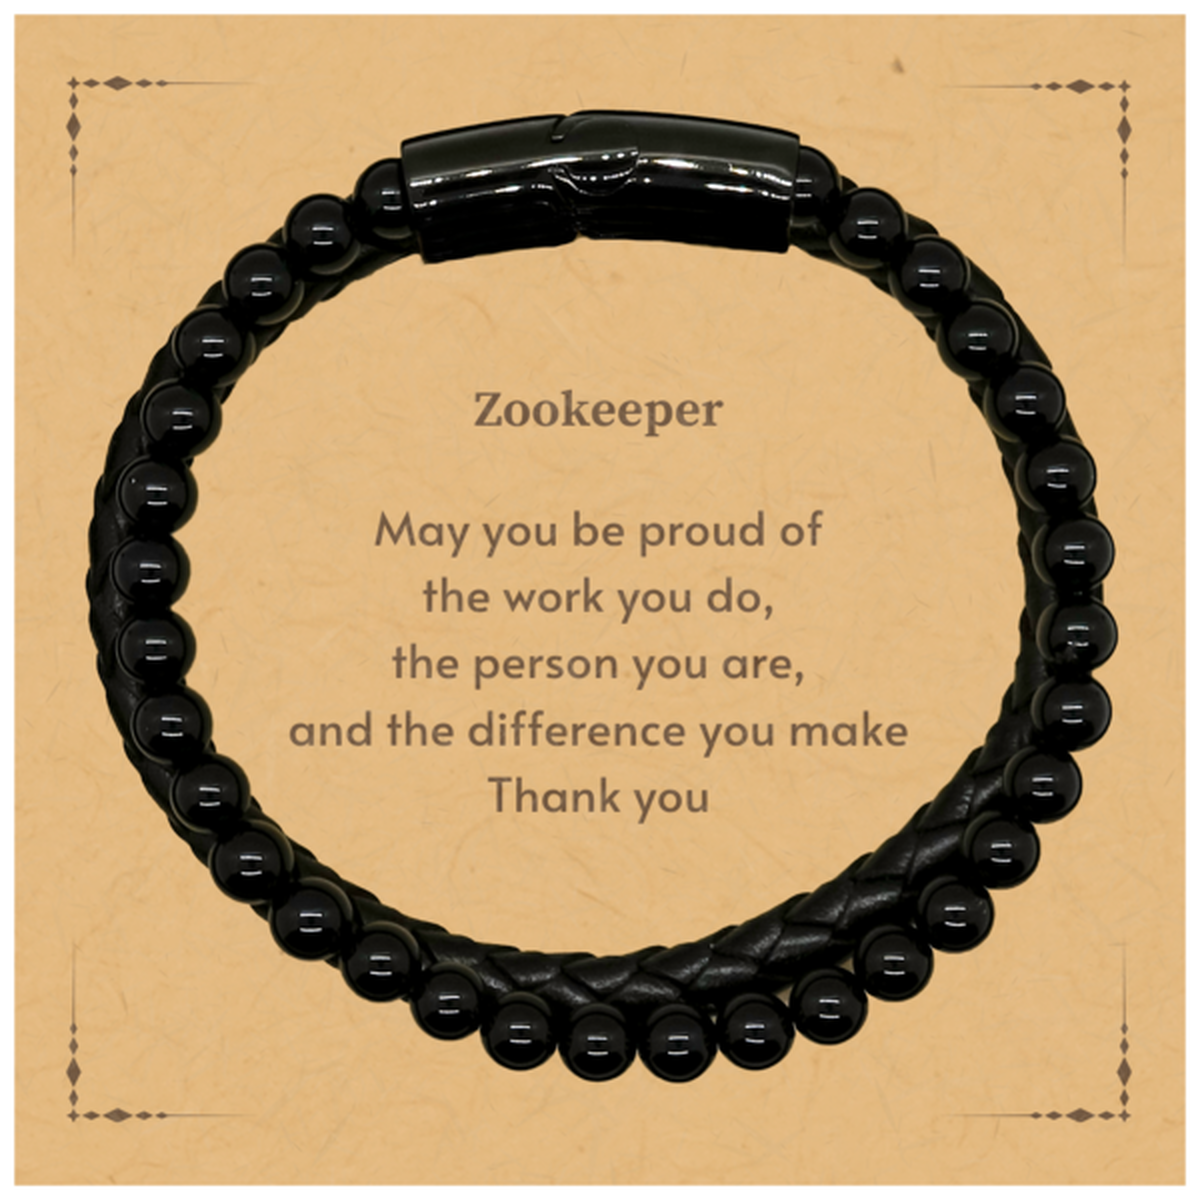 Heartwarming Stone Leather Bracelets Retirement Coworkers Gifts for Zookeeper, Zookeeper May You be proud of the work you do, the person you are Gifts for Boss Men Women Friends